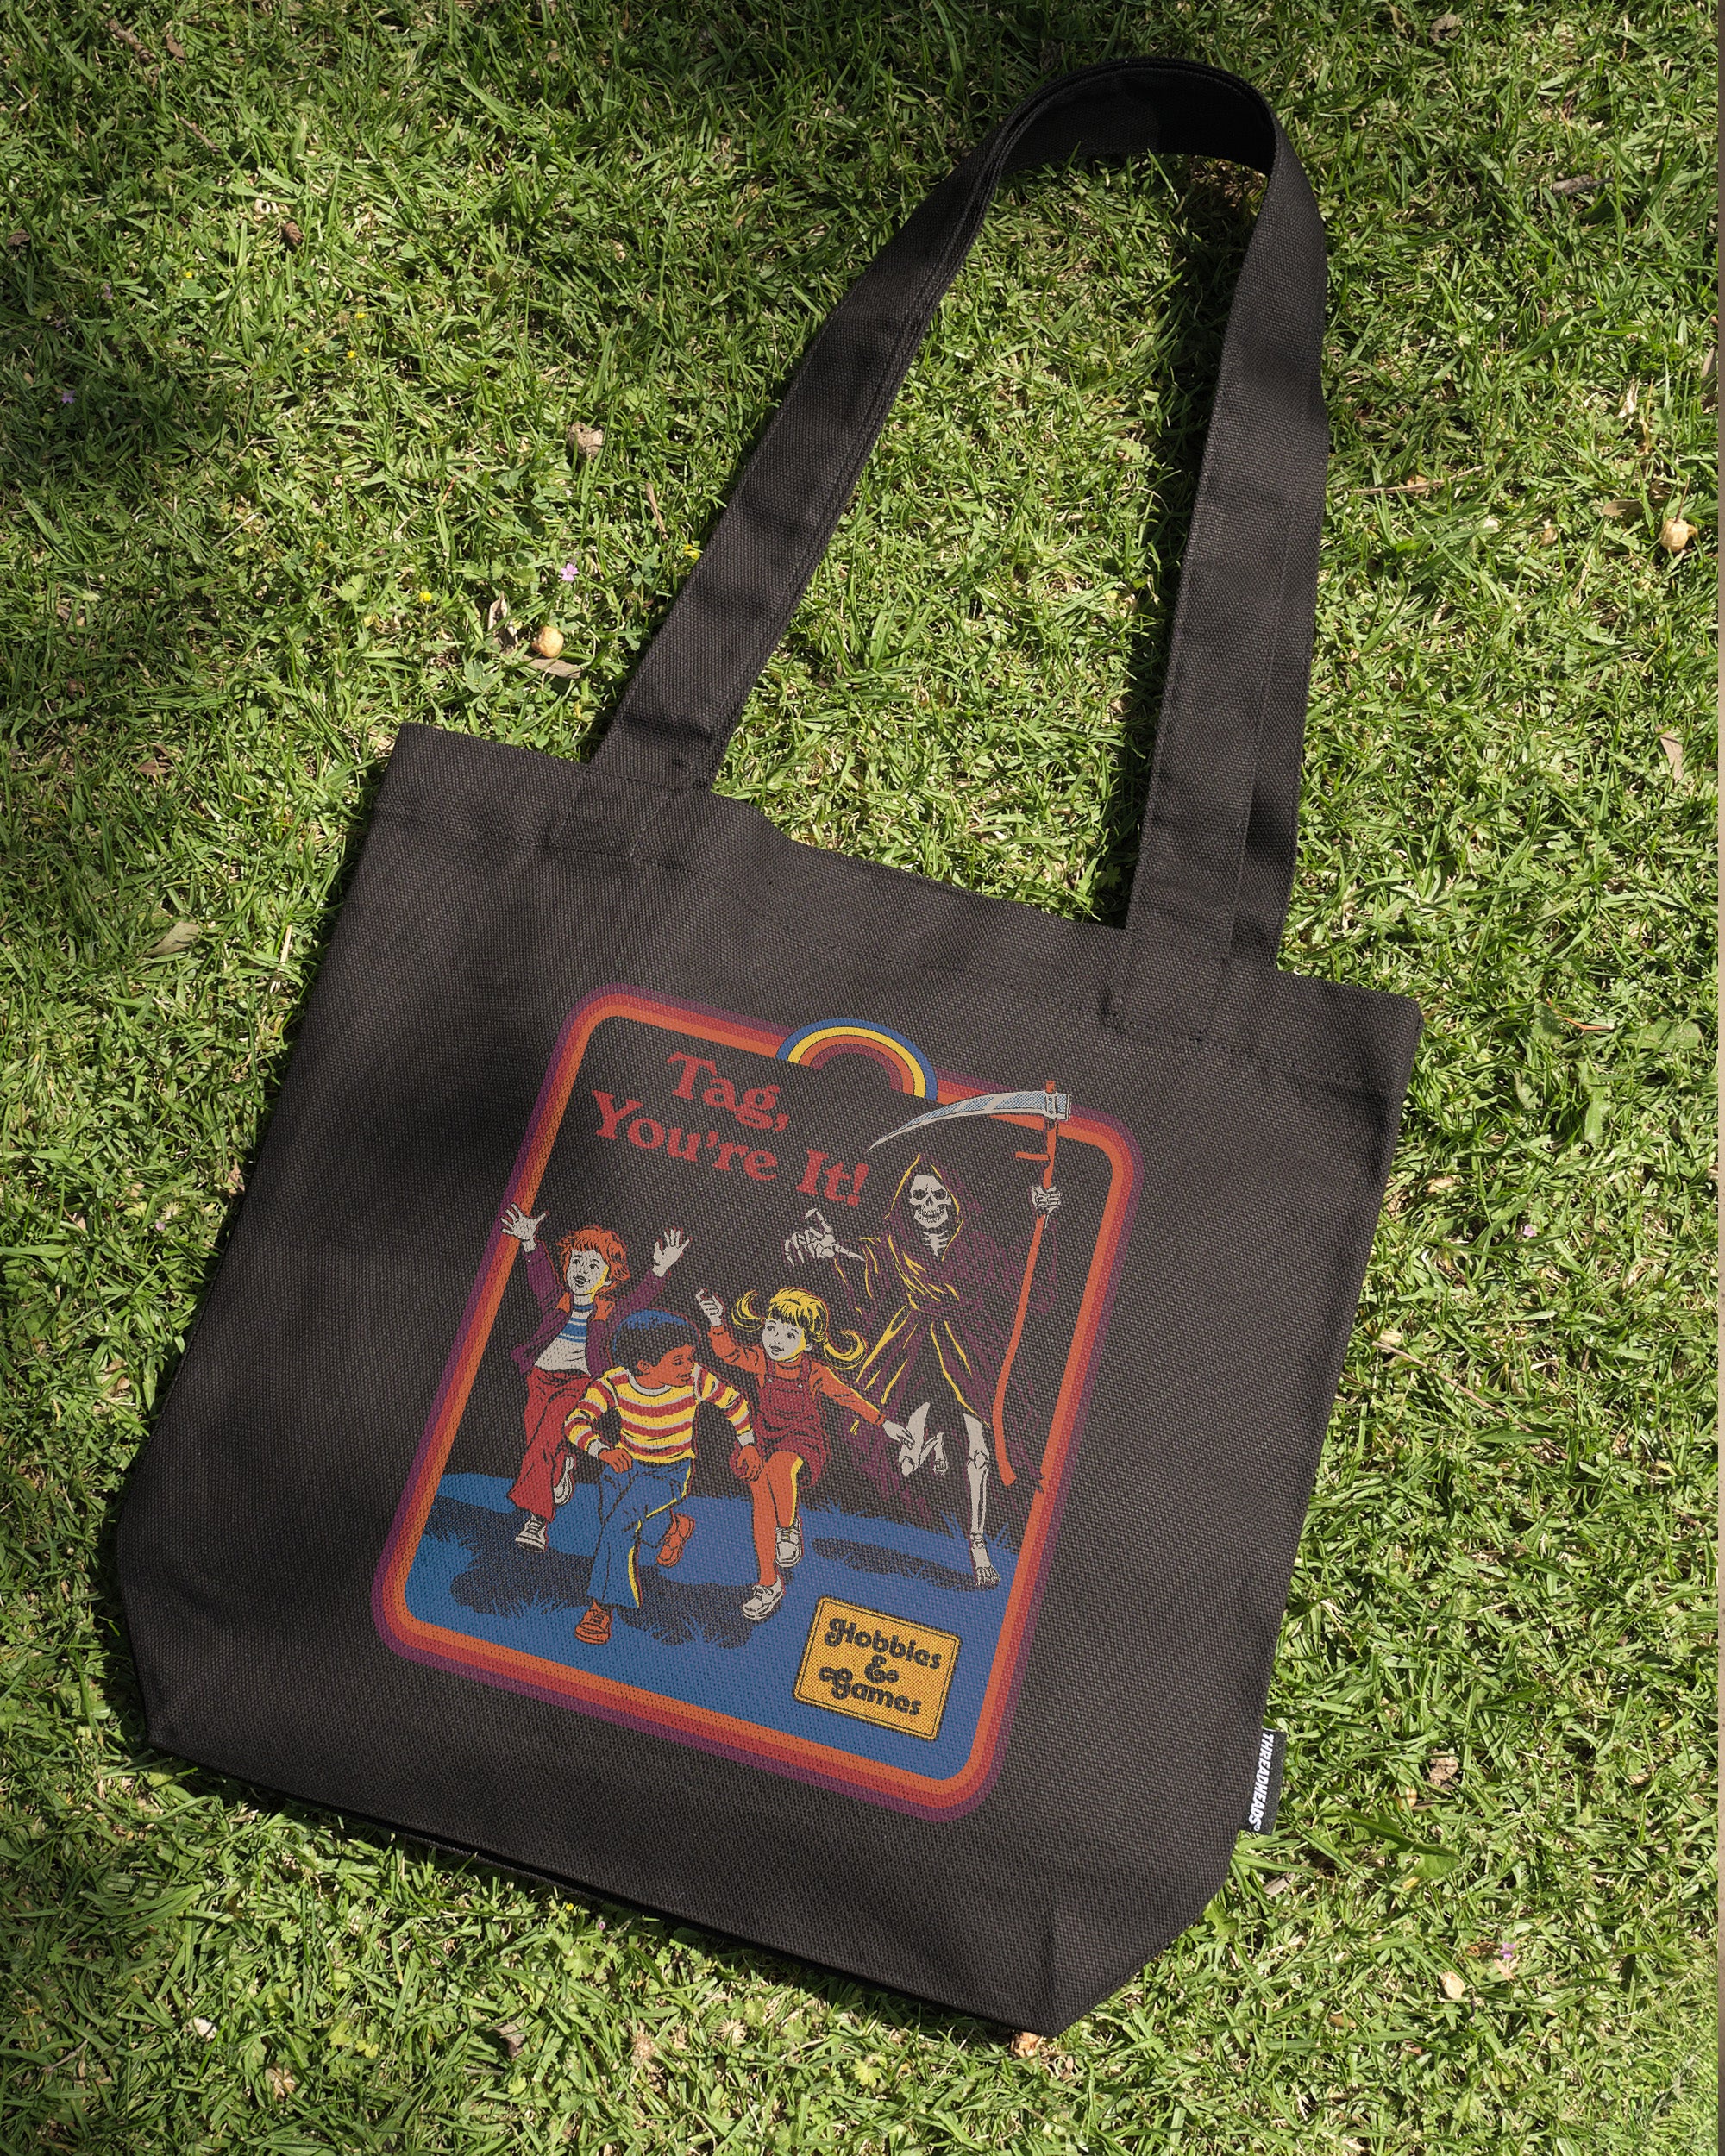 Tag You're It! Tote Bag